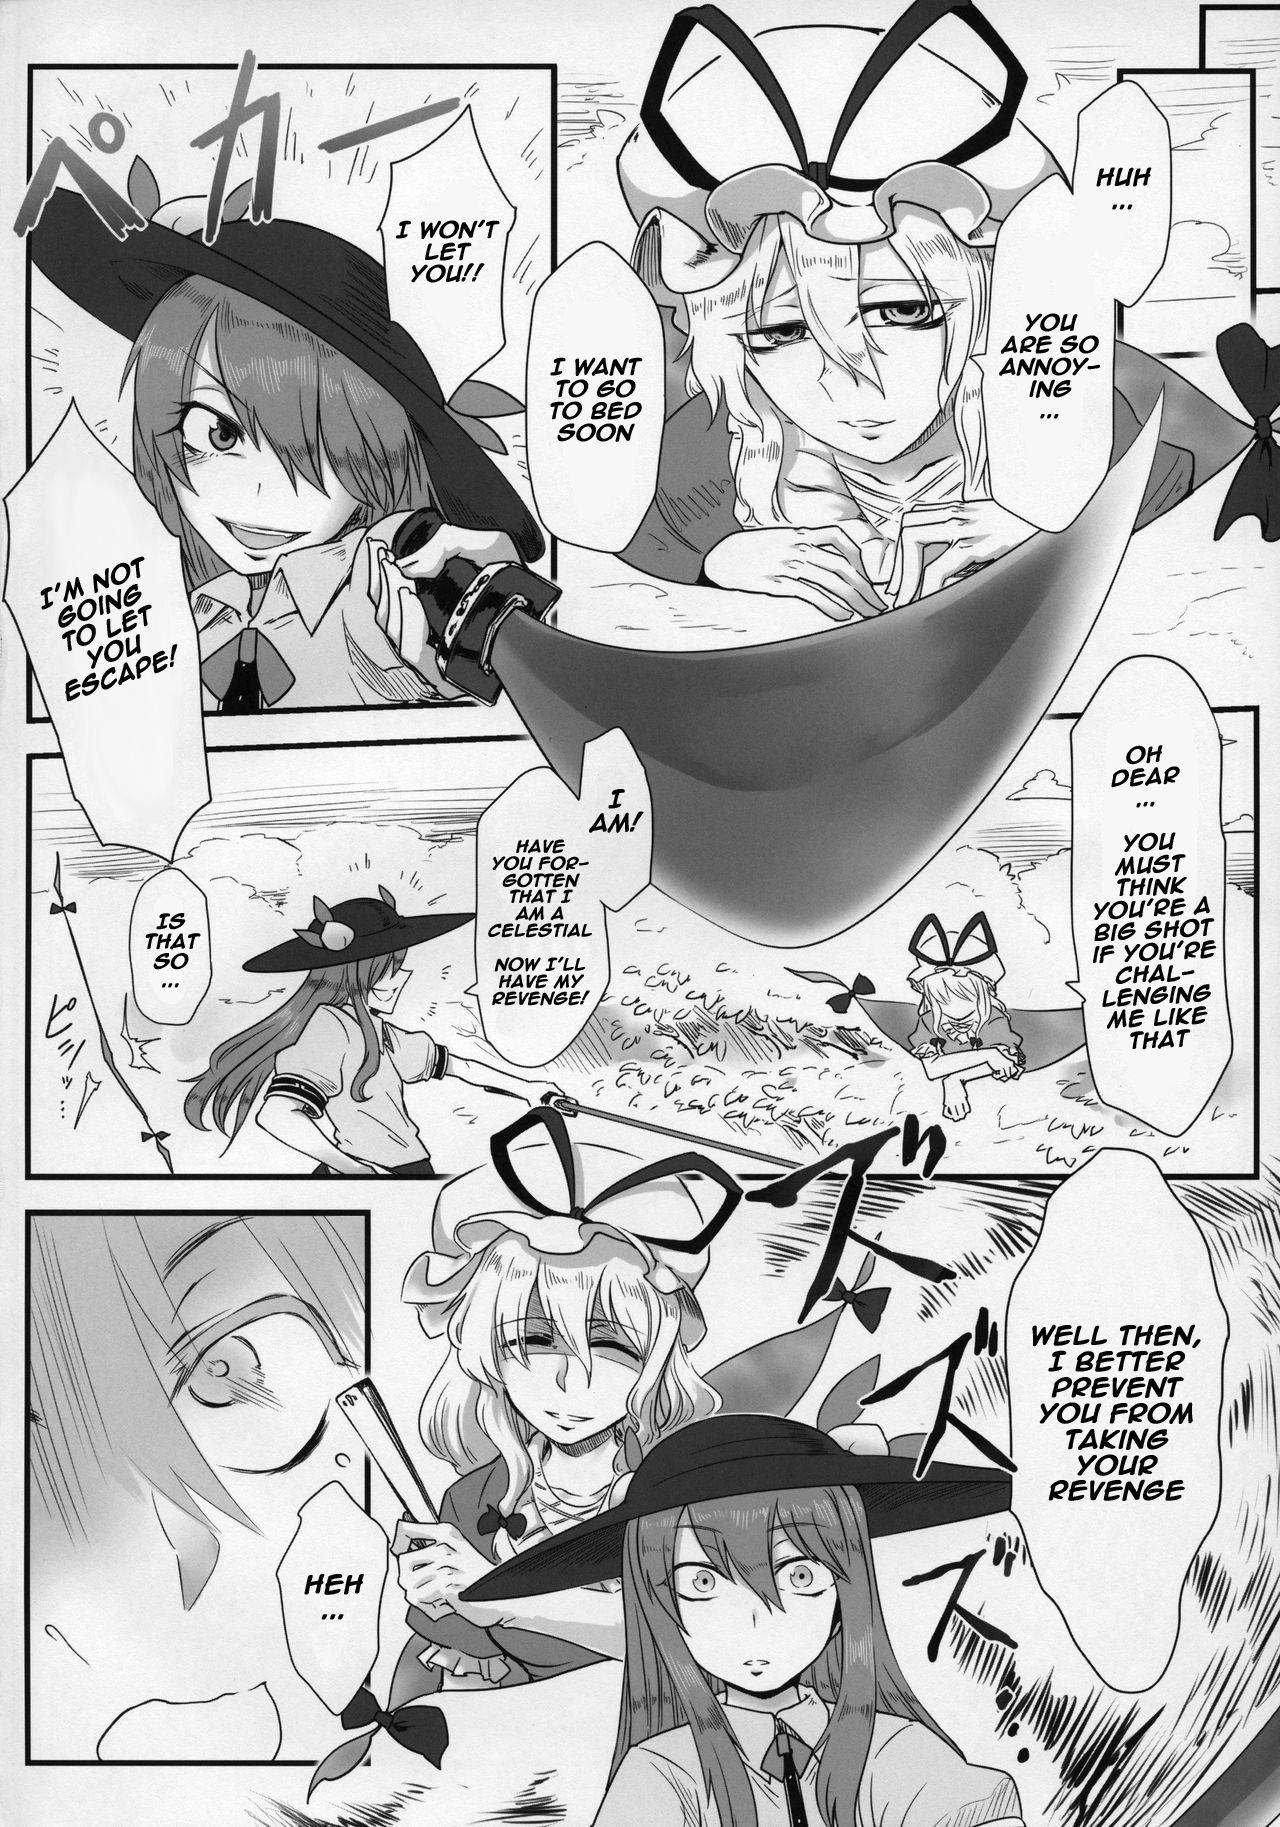 Big breasts Onahotenko - Touhou project Cuckold - Page 3